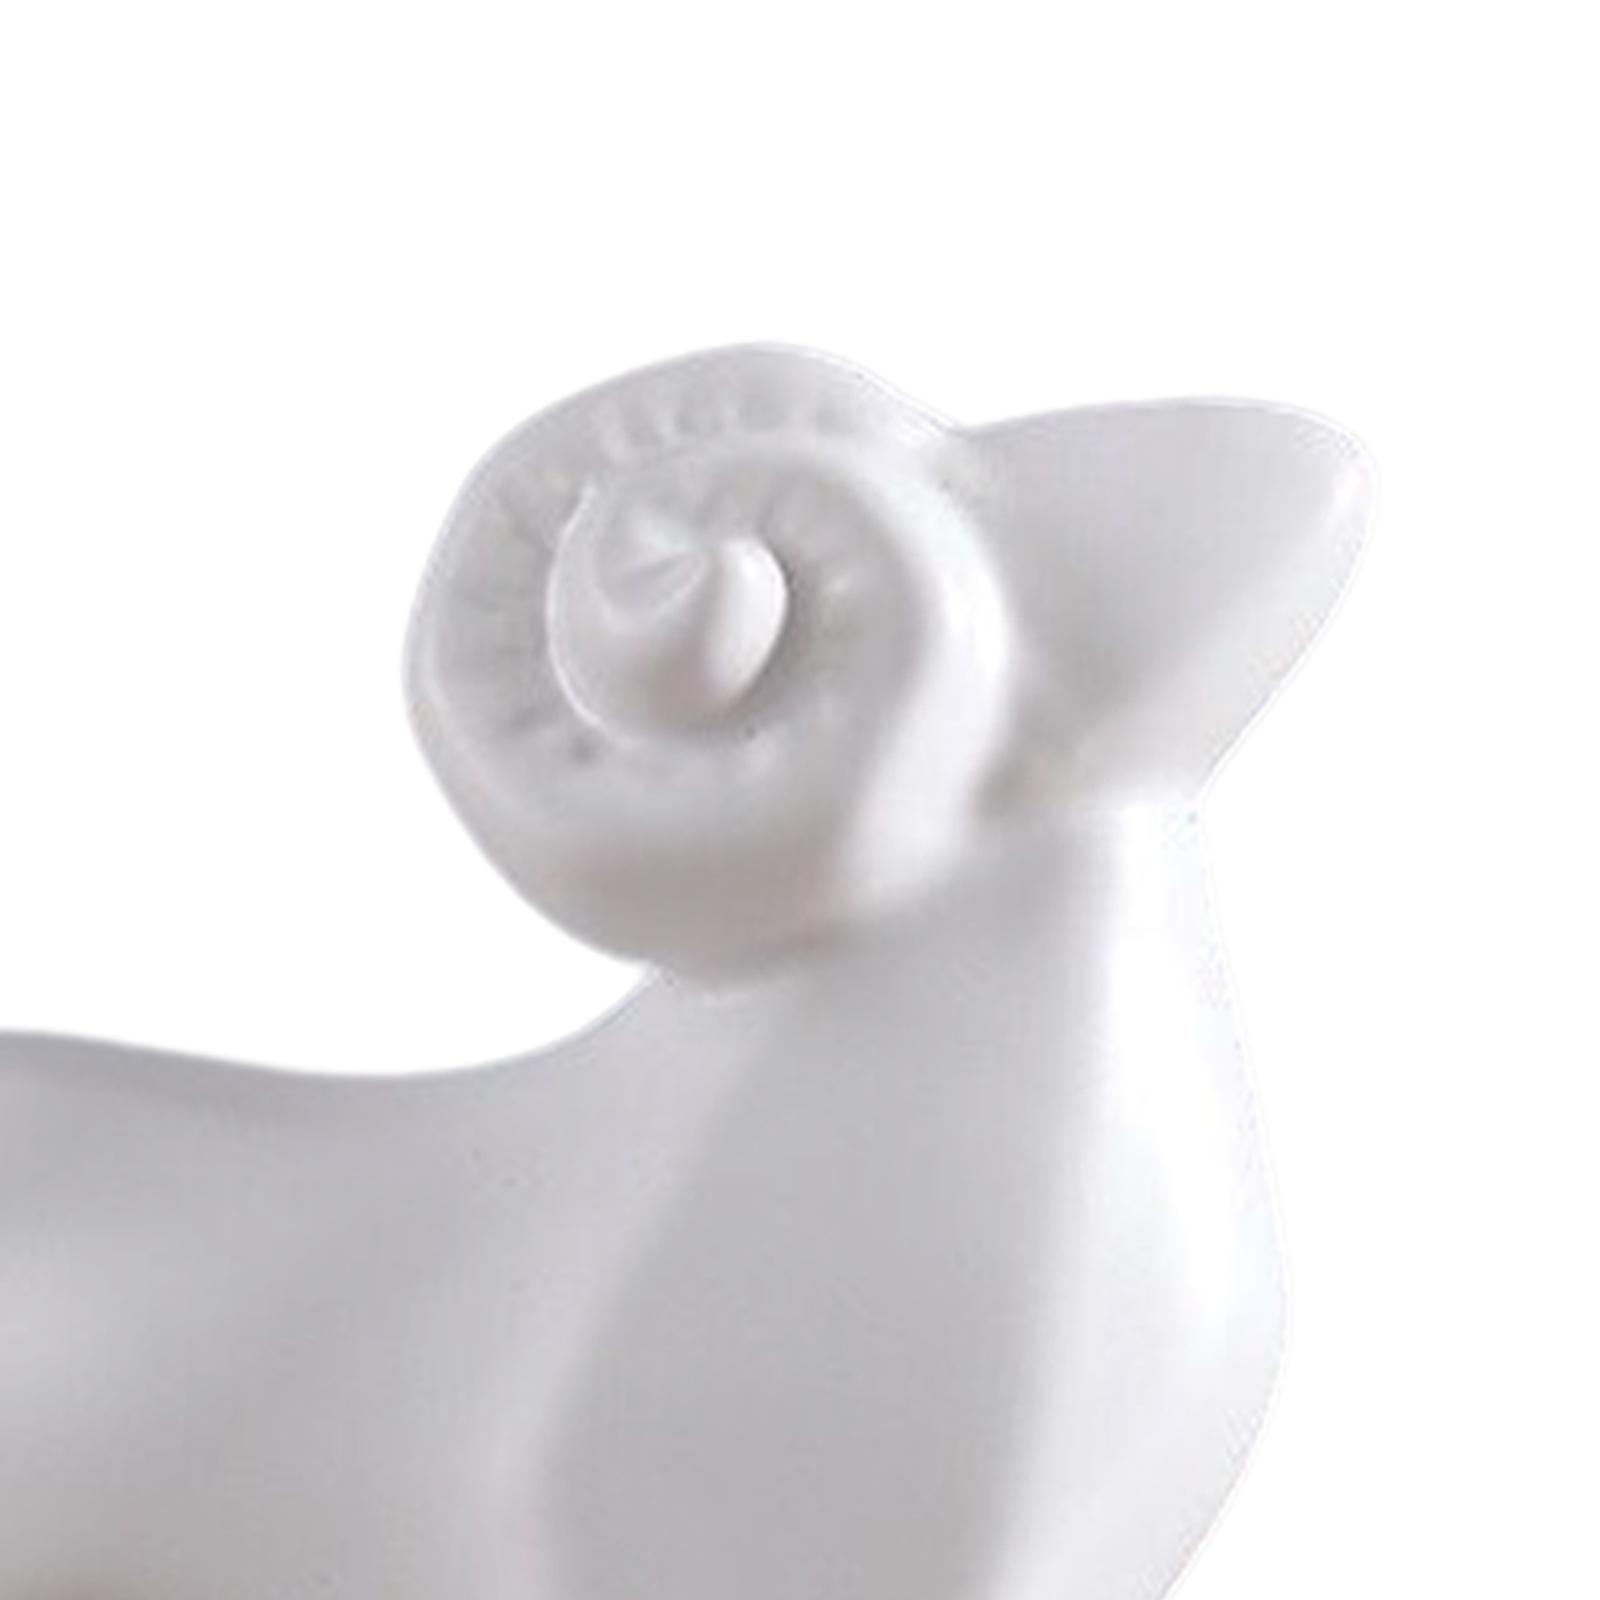 Creative Sheep Statue, Porcelain Nordic Collectable Ornament Animal Figurine for Desktop Bedroom Shop Bookshelf Decoration White Small - image 4 of 8